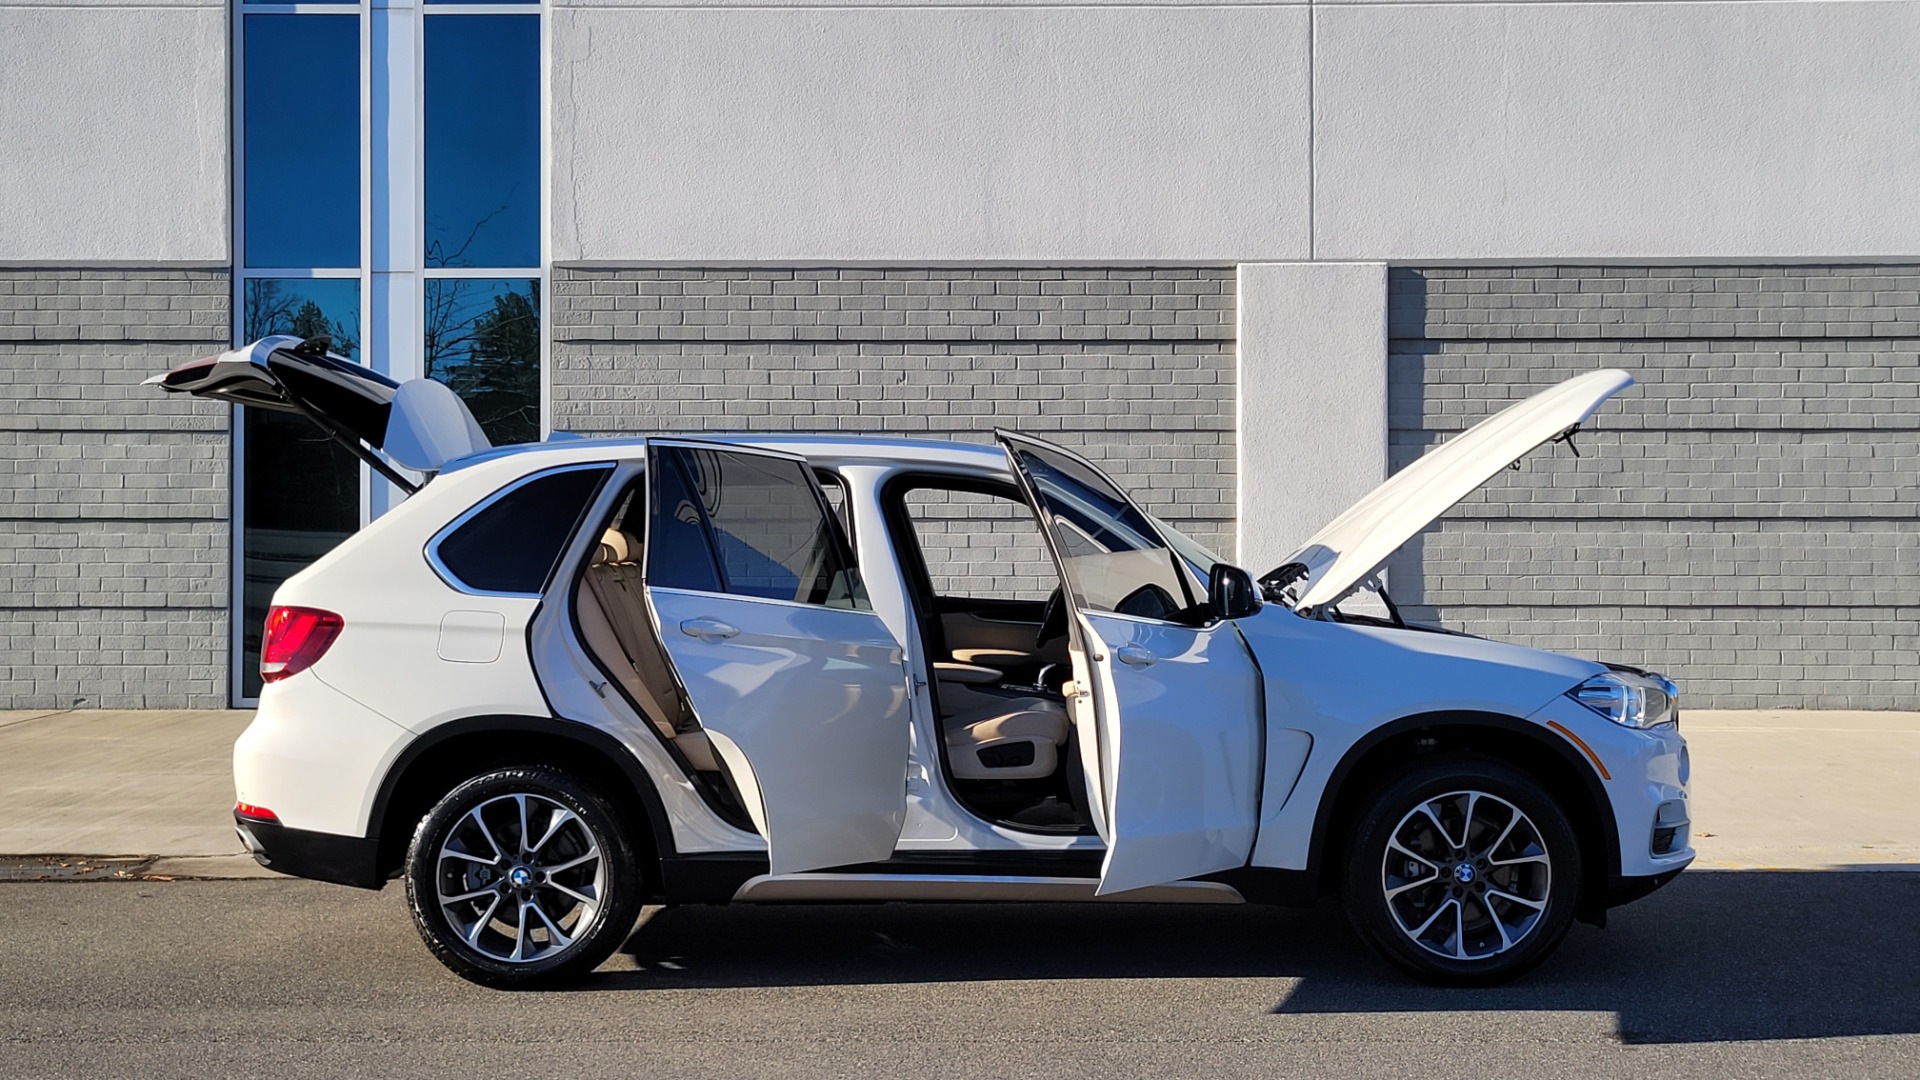 Used 2018 BMW X5 XDRIVE35I PREMIUM / DRVR ASST / HUD / WIRELESS CHARGING / HEATED SEATS for sale $41,995 at Formula Imports in Charlotte NC 28227 12